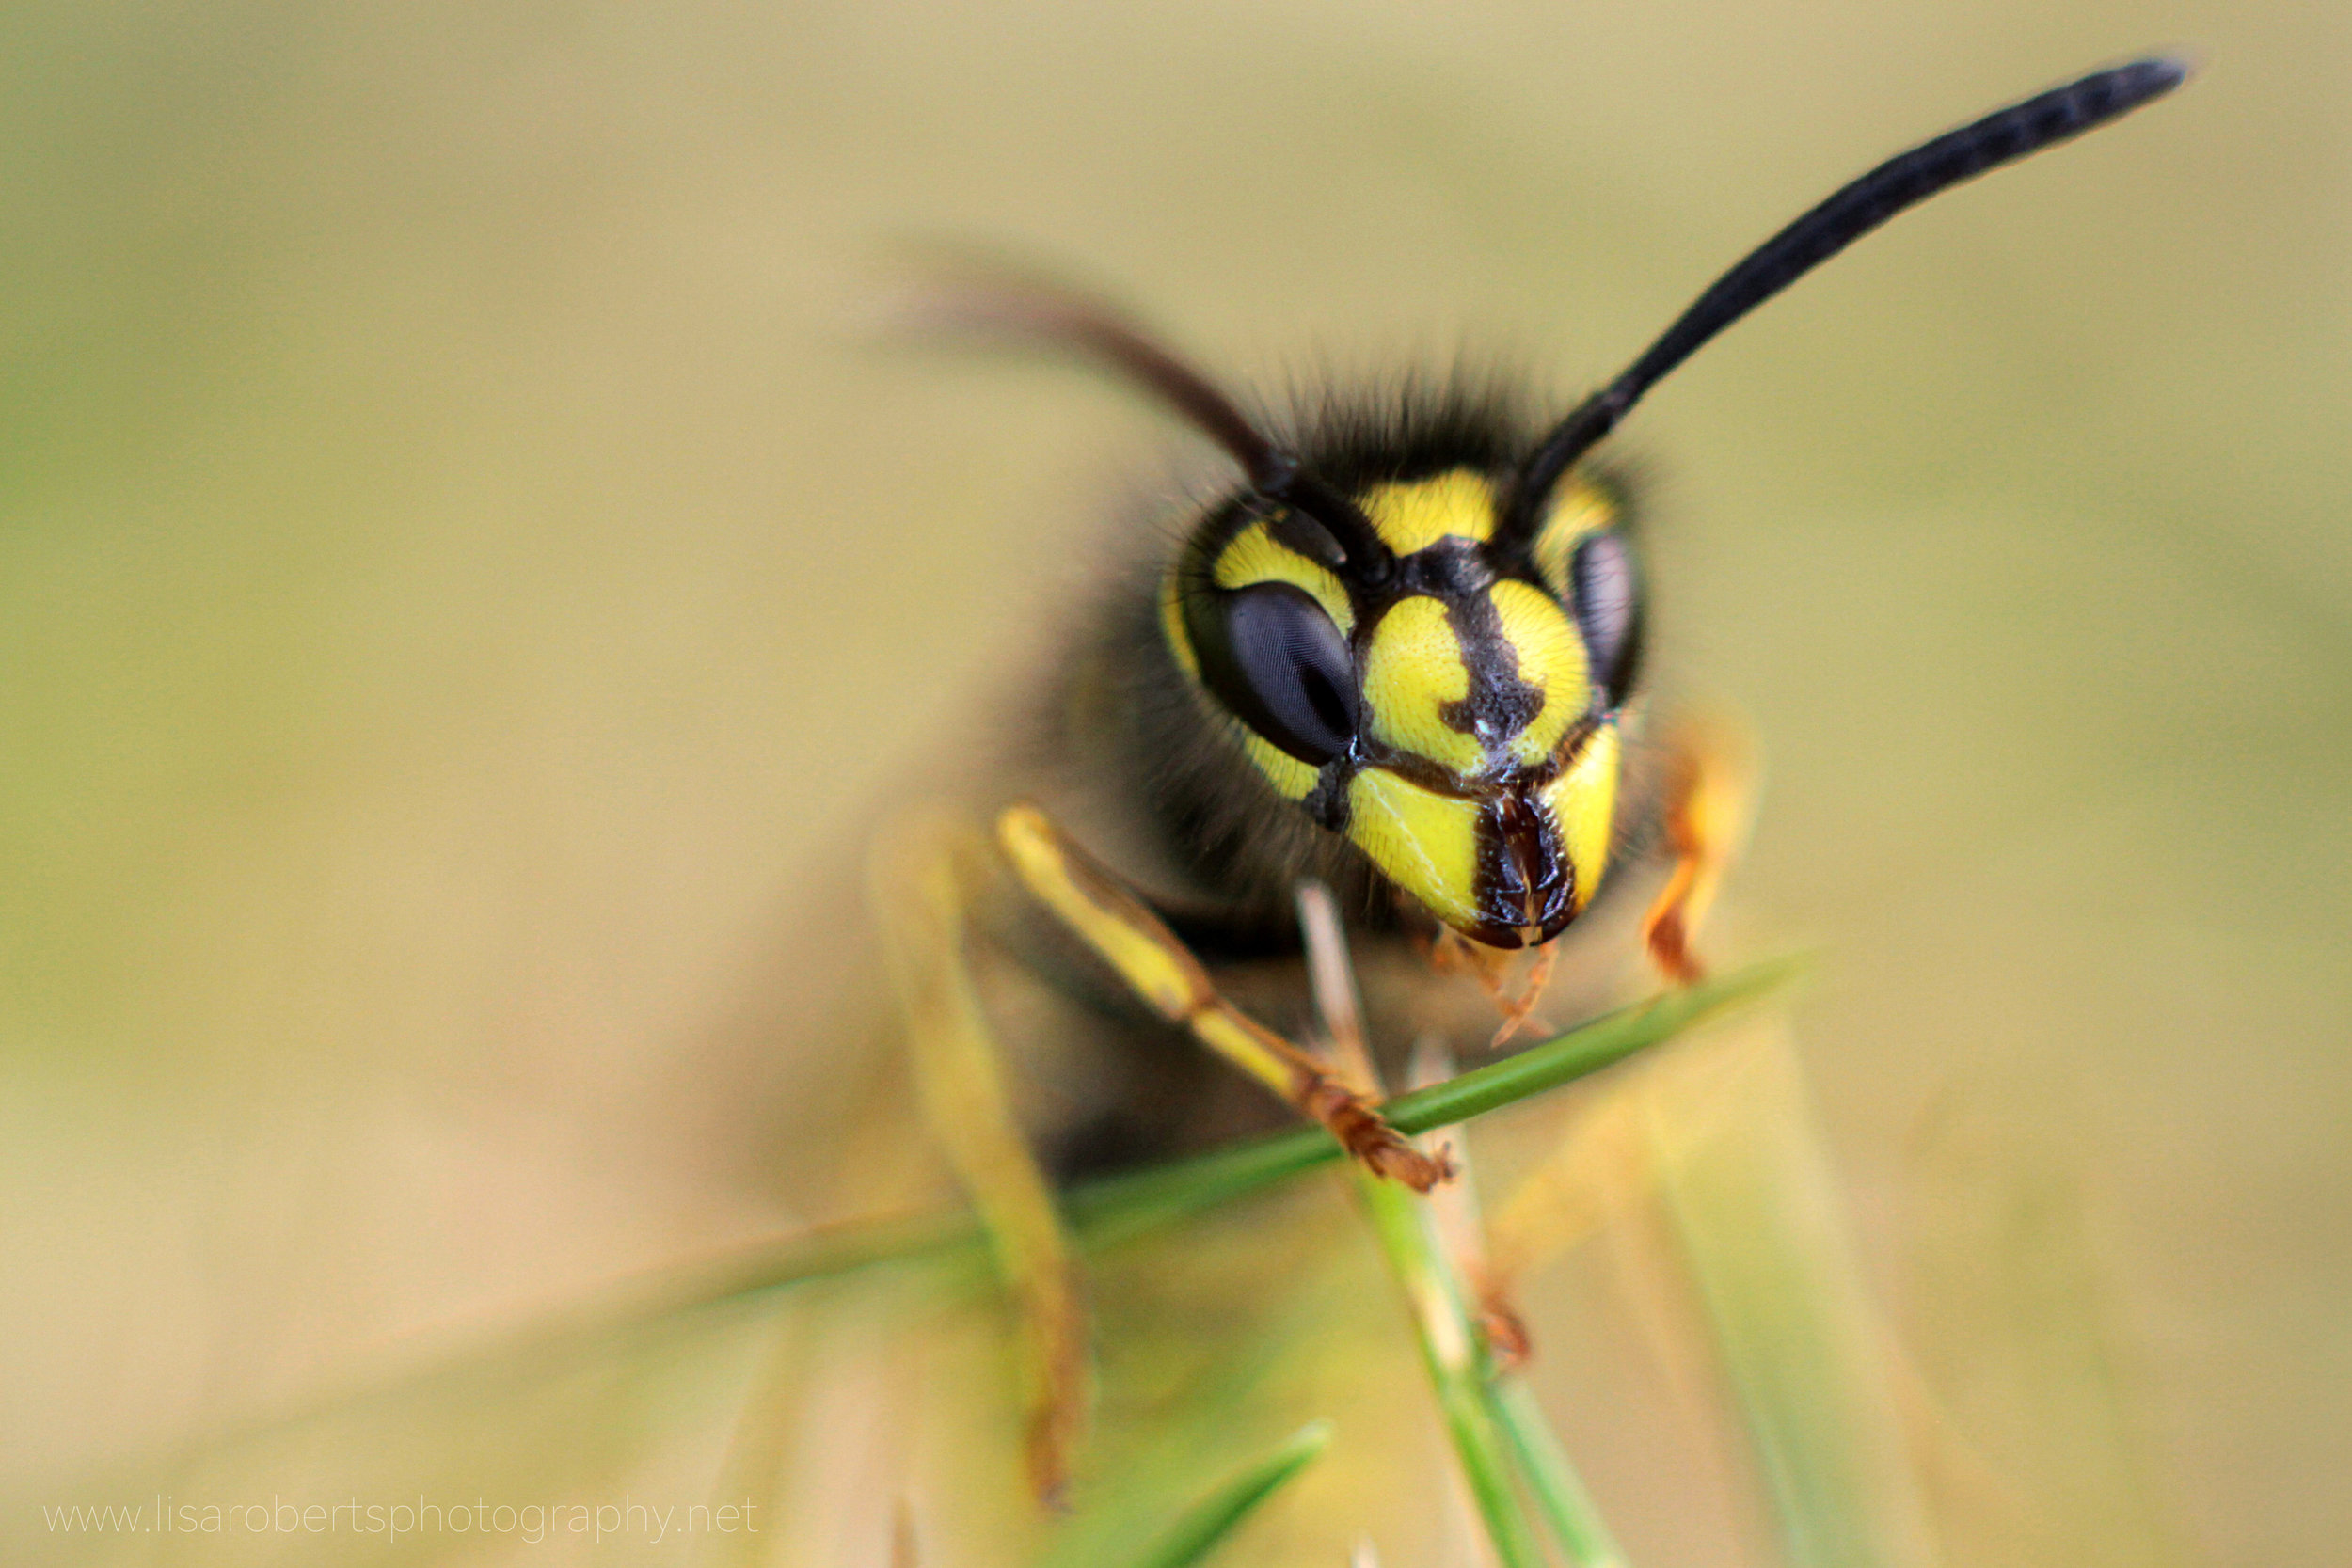  Wasp front view 